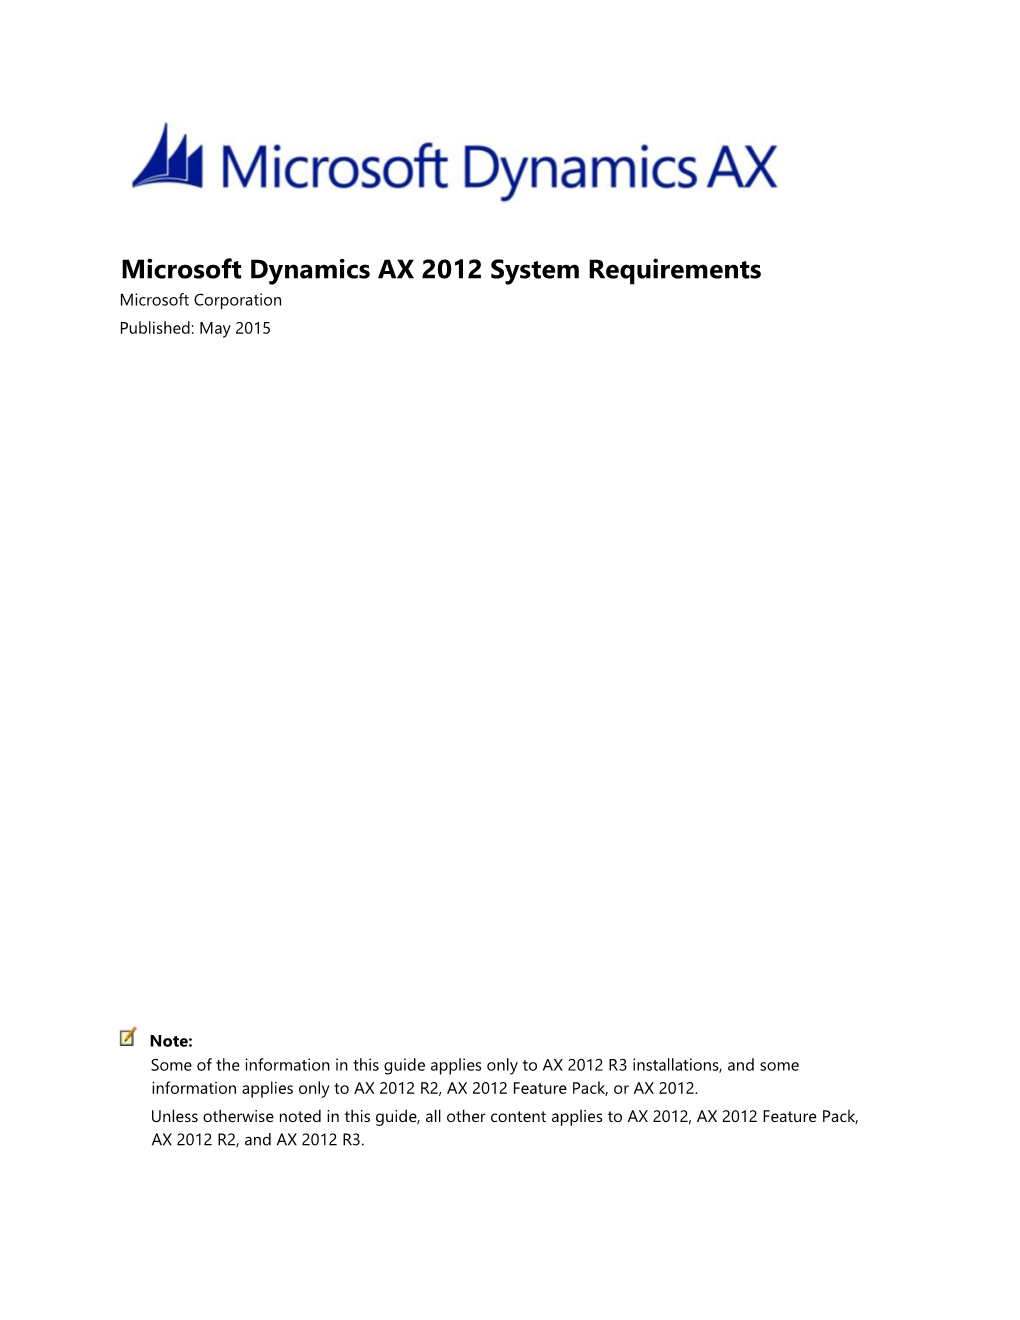 Microsoft Dynamics AX 2012 System Requirements Microsoft Corporation Published: May 2015